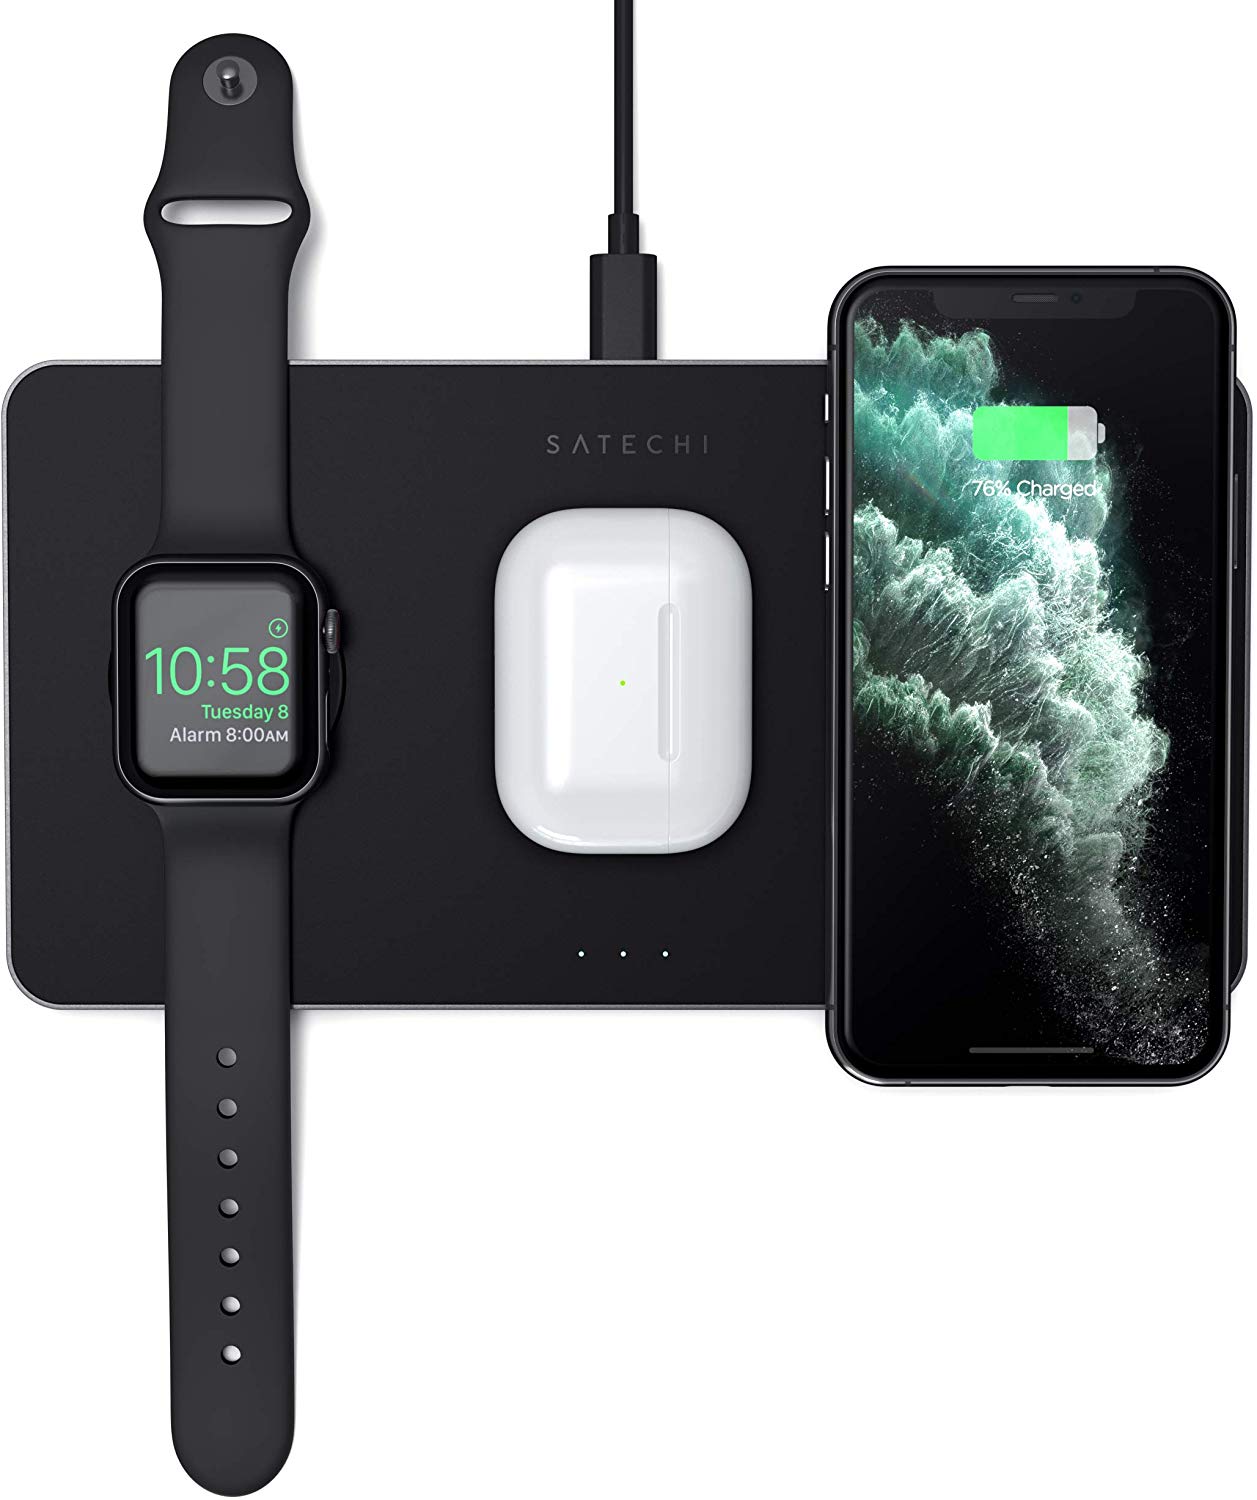 Satechi Launches Trio Wireless Charger for iPhone, AirPods, Apple Watch [Video]